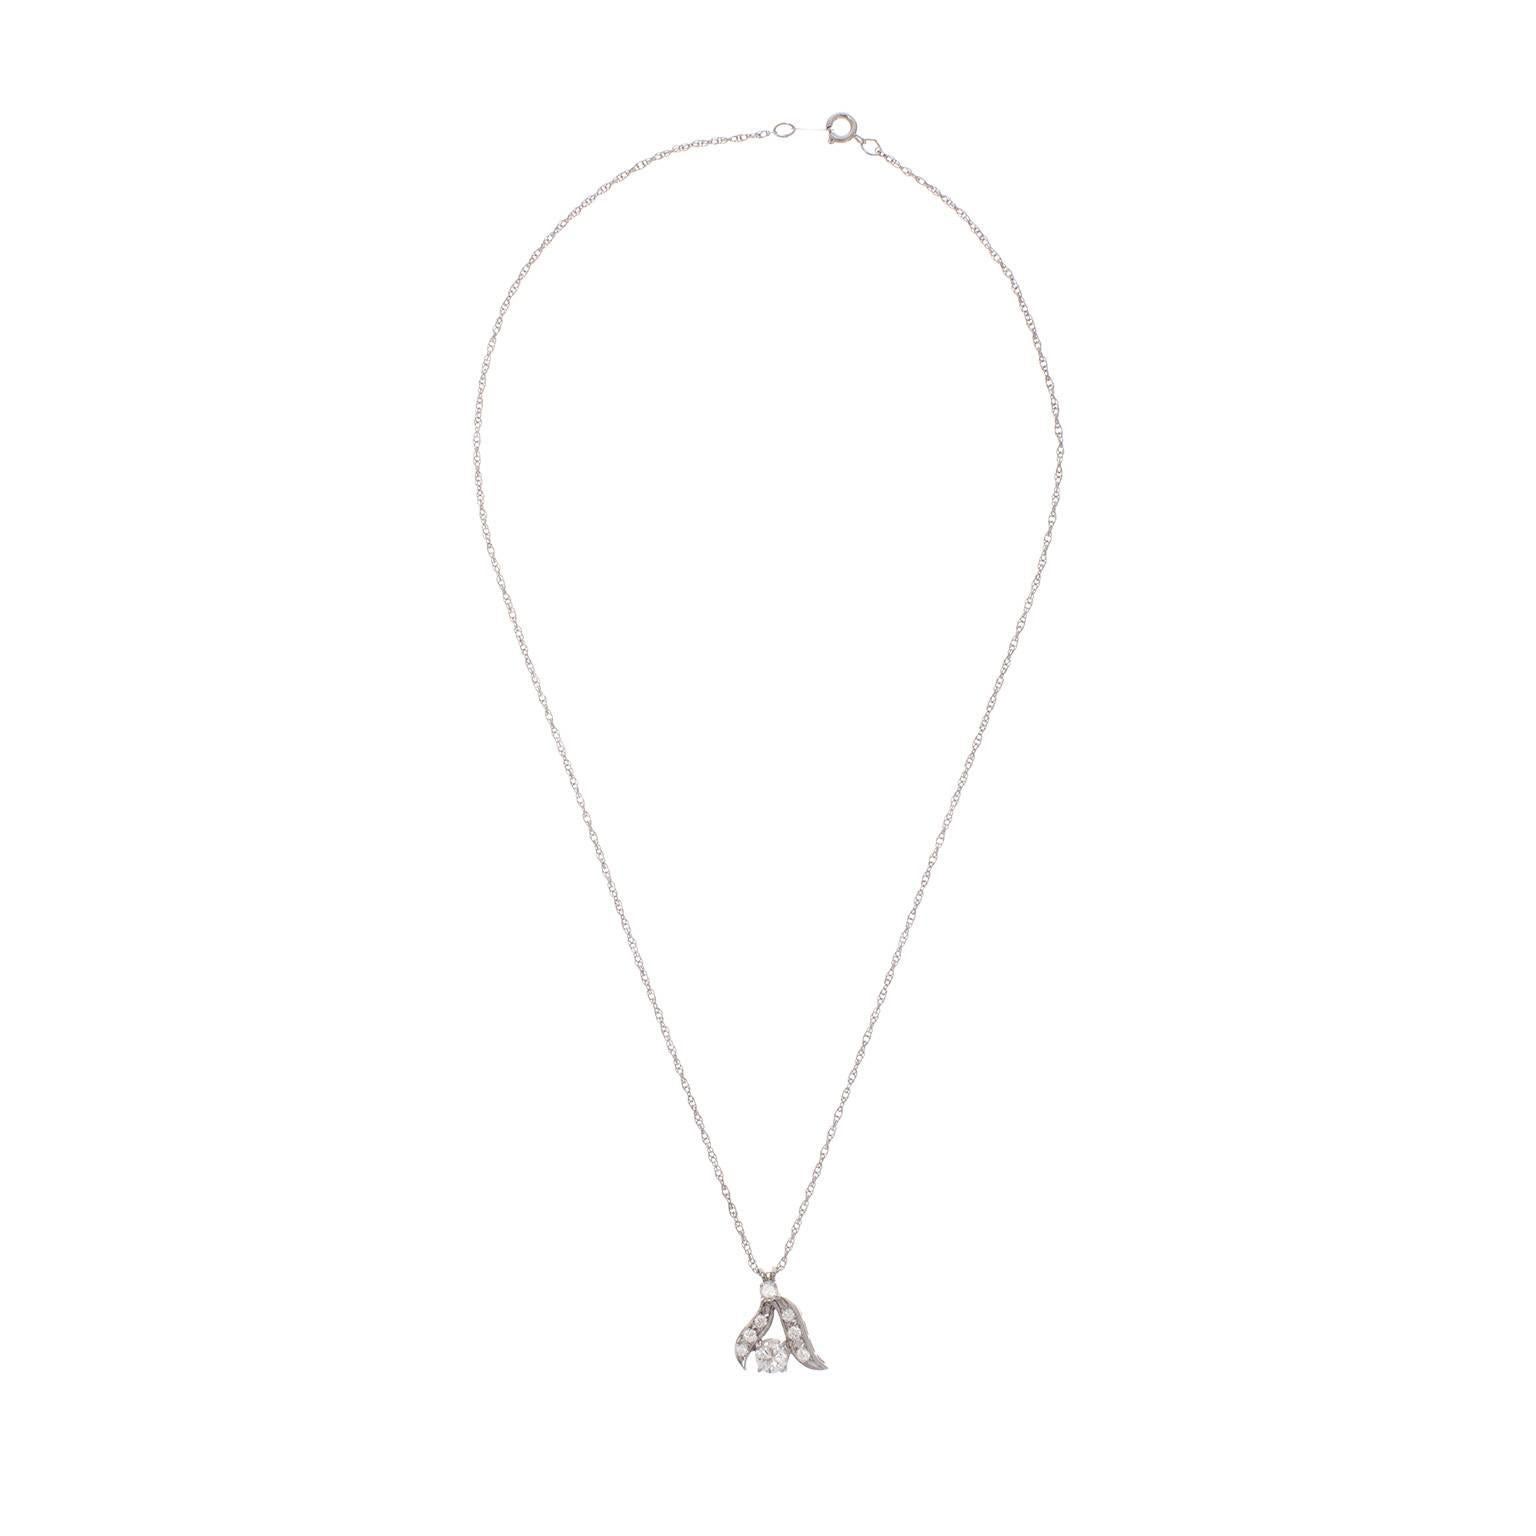 A beautiful, easy to wear diamond pendant necklace.  The round brilliant diamonds are set in 14k white gold, in the form of a budding tree branch.  The center diamond is estimated to be .60cts, G-H color, VS2 clarity, with seven smaller diamonds